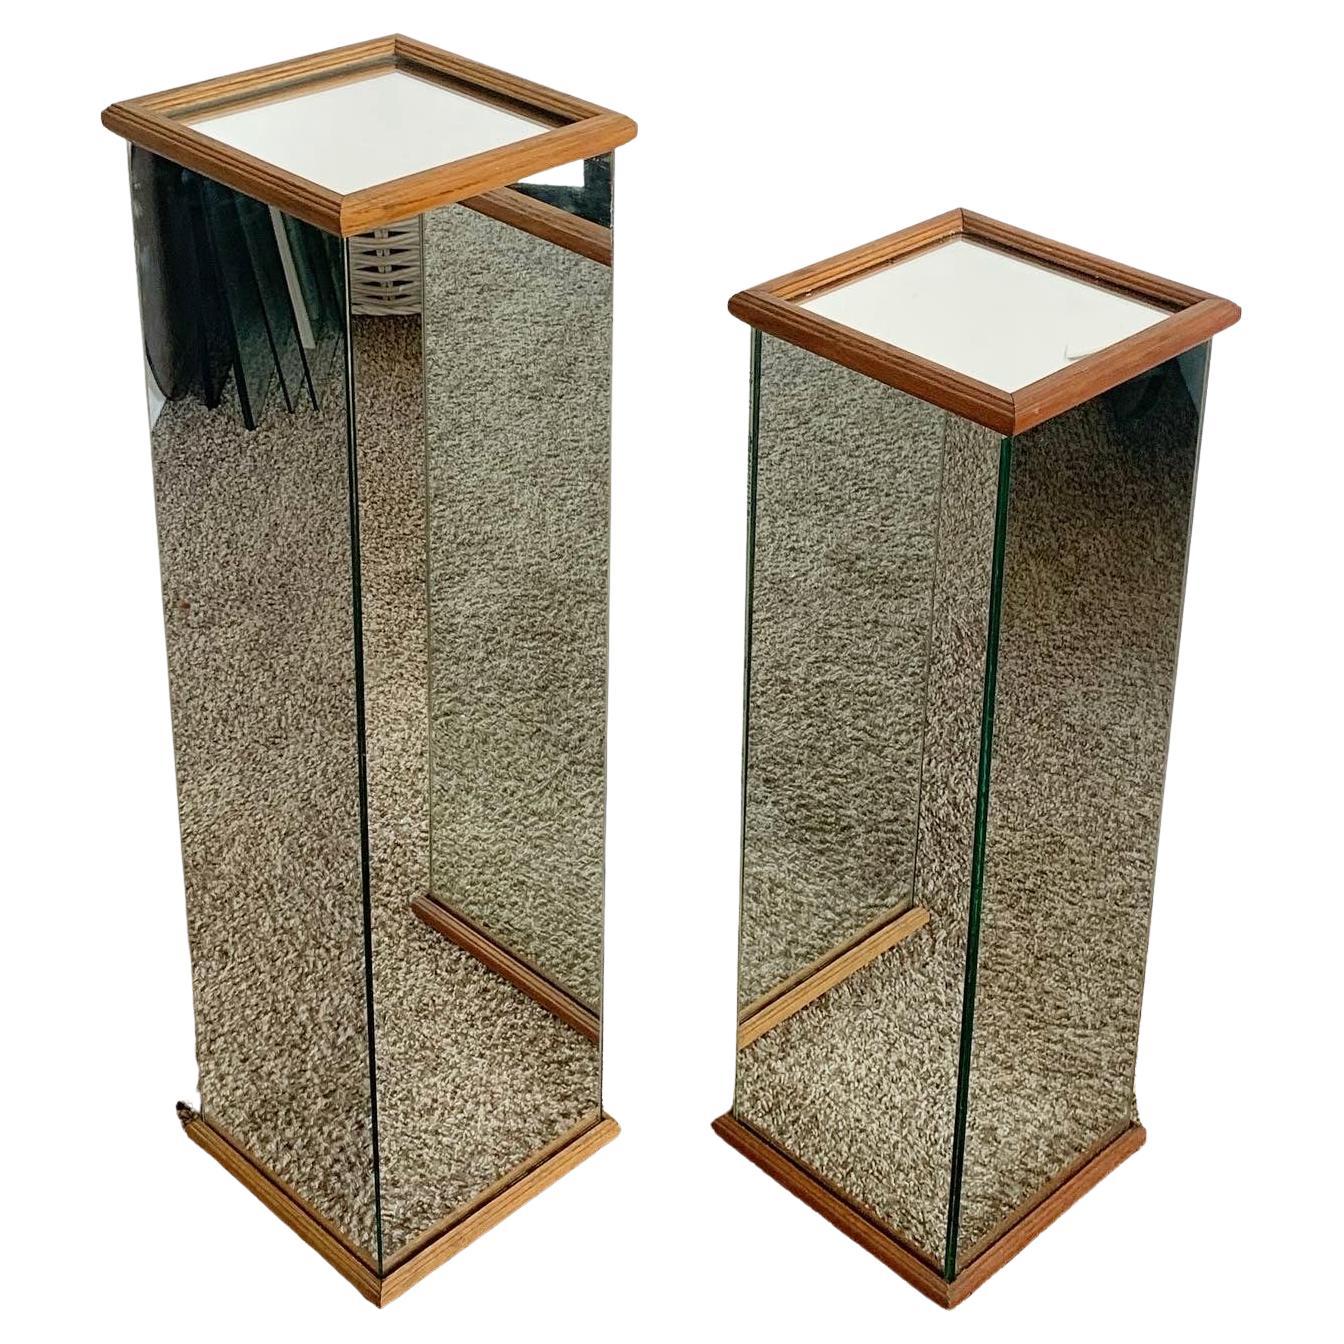 Postmodern Rectangular Prism With Wooden Trim Pedestal Side Tables - a Pair For Sale